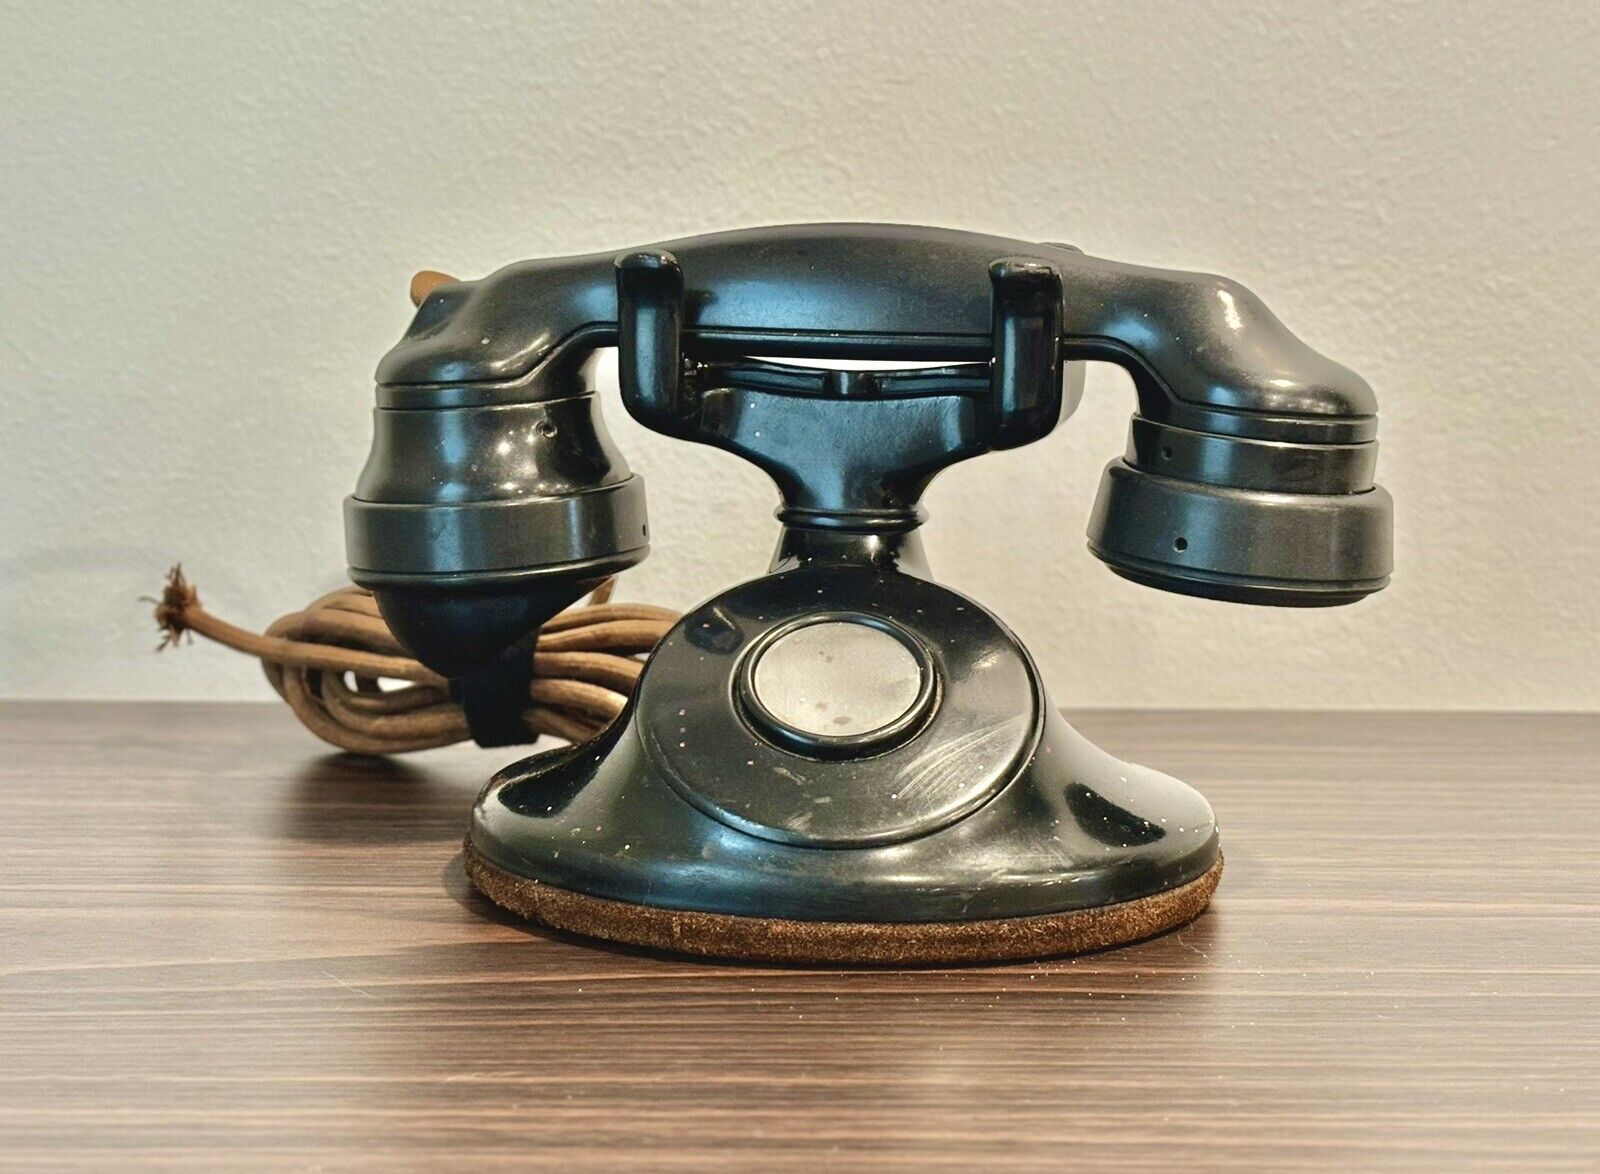 Vintage 1930’s Western Electric Telephone Model 202 Non-Dial Handset